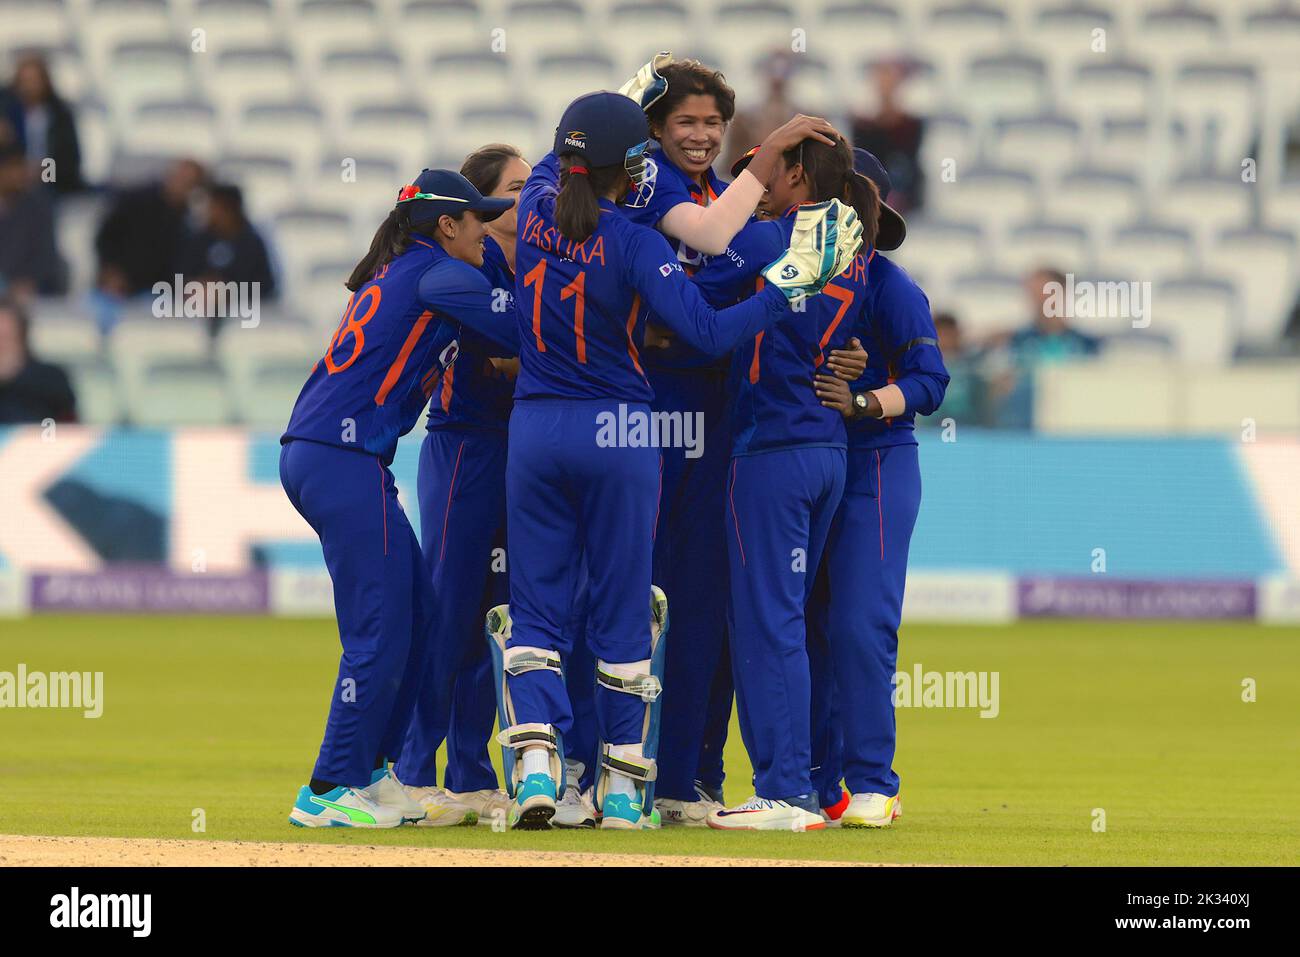 24 September , 2022, London, UK. Celebratiions after India’s Jhulan Goswami bowls Kate Cross as England women take on India in the 3rd Royal London One Day International at Lords. David Rowe/Alamy Live News. Stock Photo